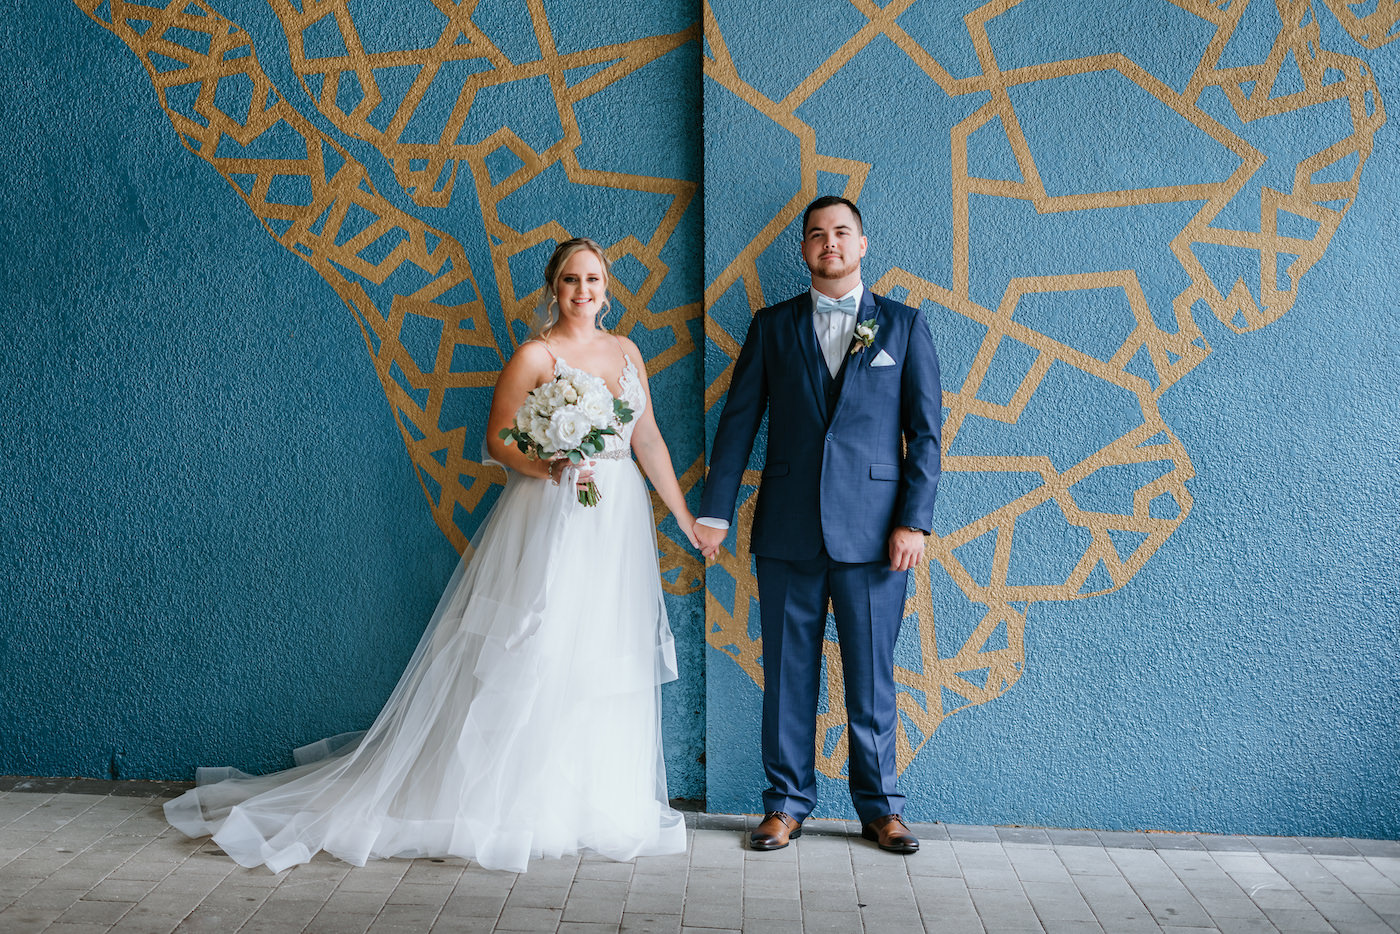 Downtown St. Petersburg Bride in Romantic Tulle Skirt Wedding Dress Holding White Floral Bouquet and Groom Modern Wedding Portrait in Front of Blue and Gold Ya Laford Art Wall Mural | Florida Wedding Photographer Bonnie Newman Creative | Tampa Bay Hair and Makeup Artist Bonnie Newman Creative